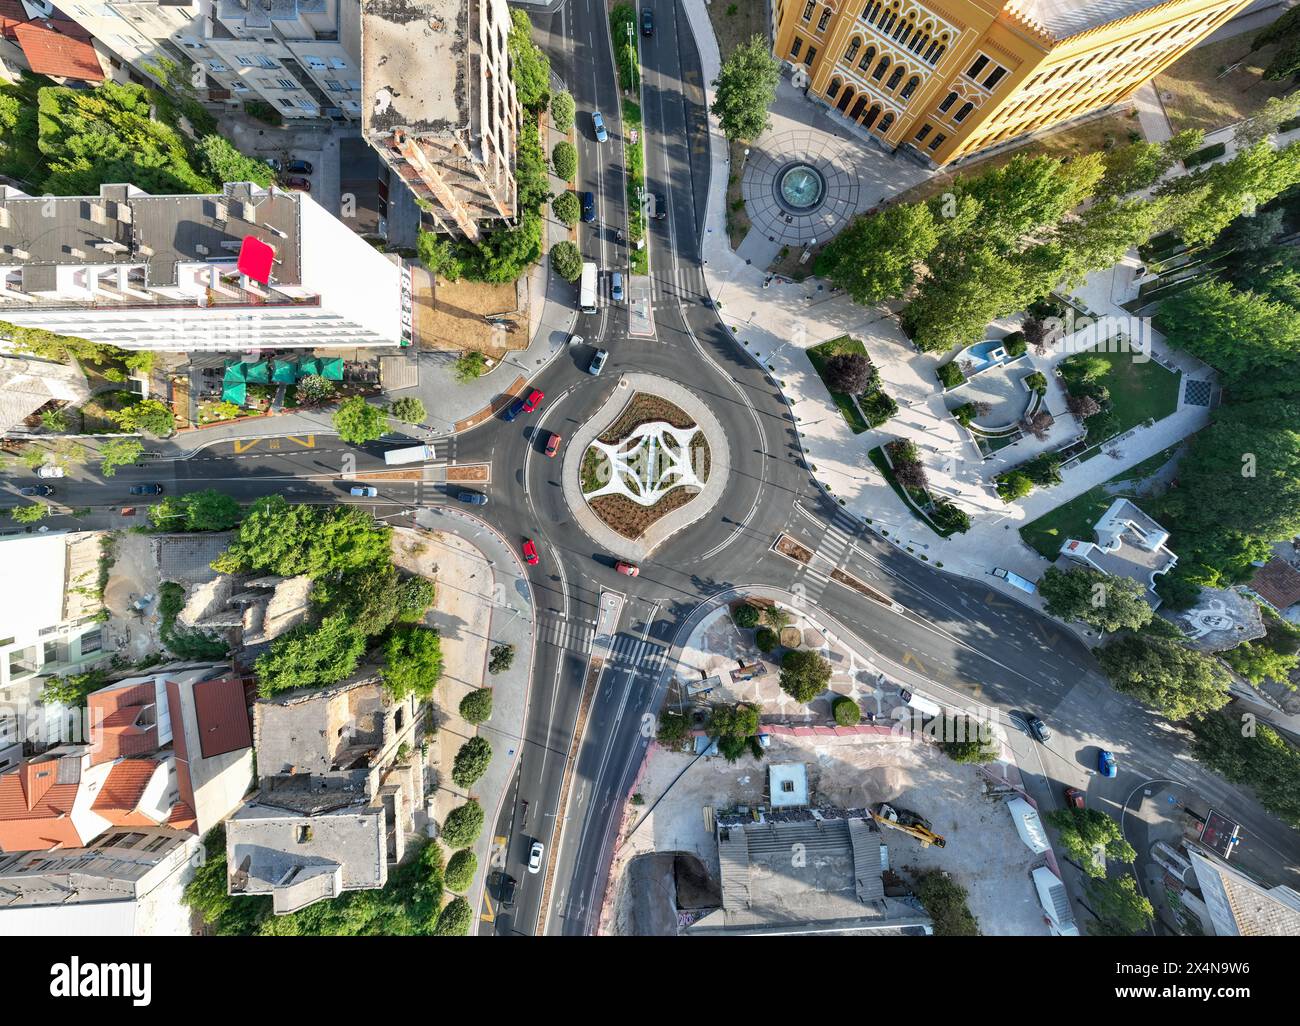 Aerial view of a roundabout in Mostar, Bosnia Herzegovina. Stock Photo